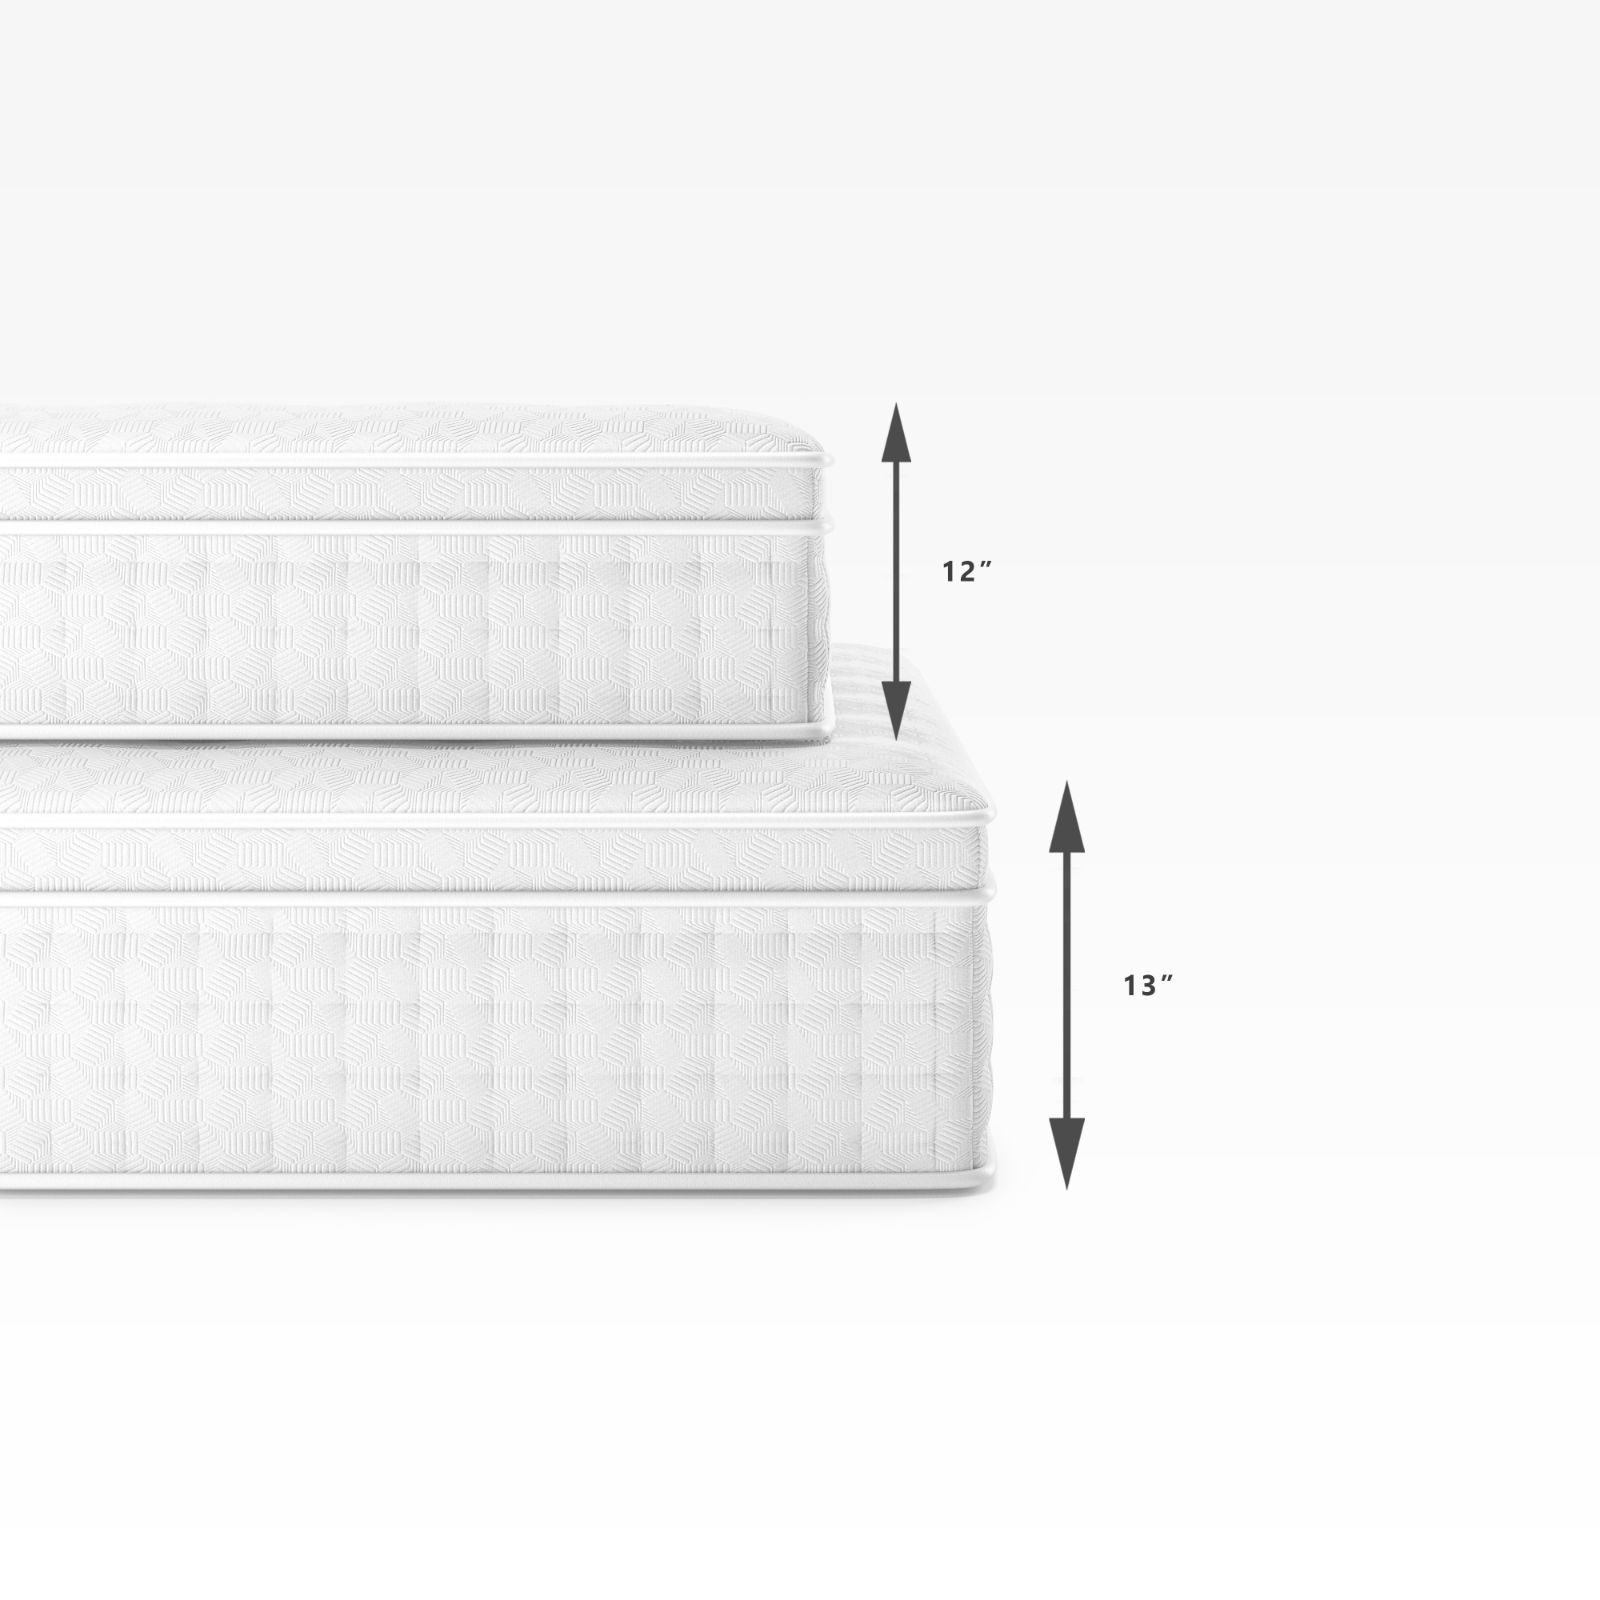 Pressure Relief Euro Top iCoil® Hybrid Mattress Profile Heights